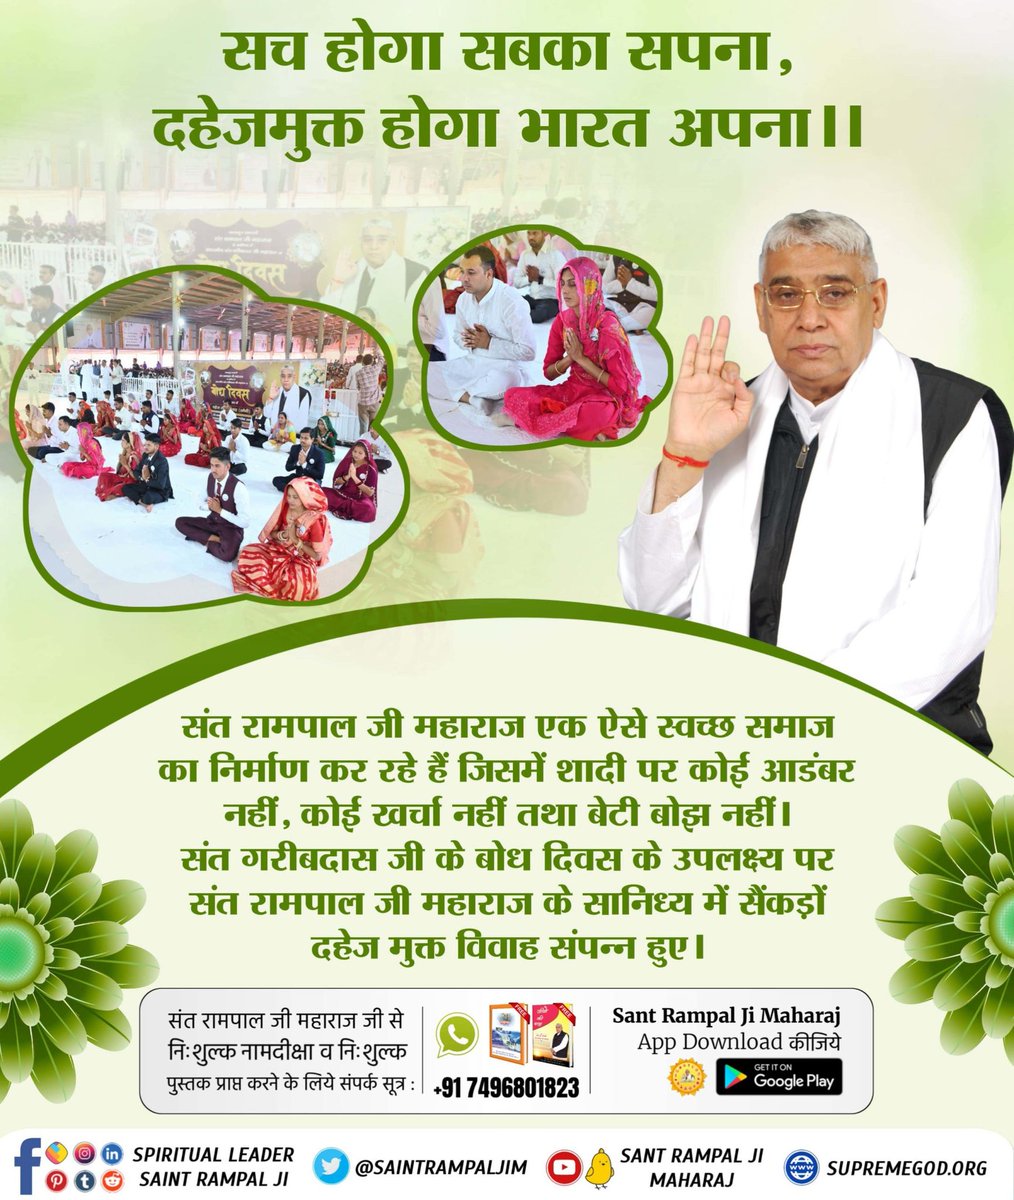 #बिना_आडंबर_के_दहेजमुक्तविवाह
The mission of Supreme Sant Rampal Ji Maharaj is to make India a dowry free country. With #MarriageIn17Minutes, they are bringing a positive & permanent change.